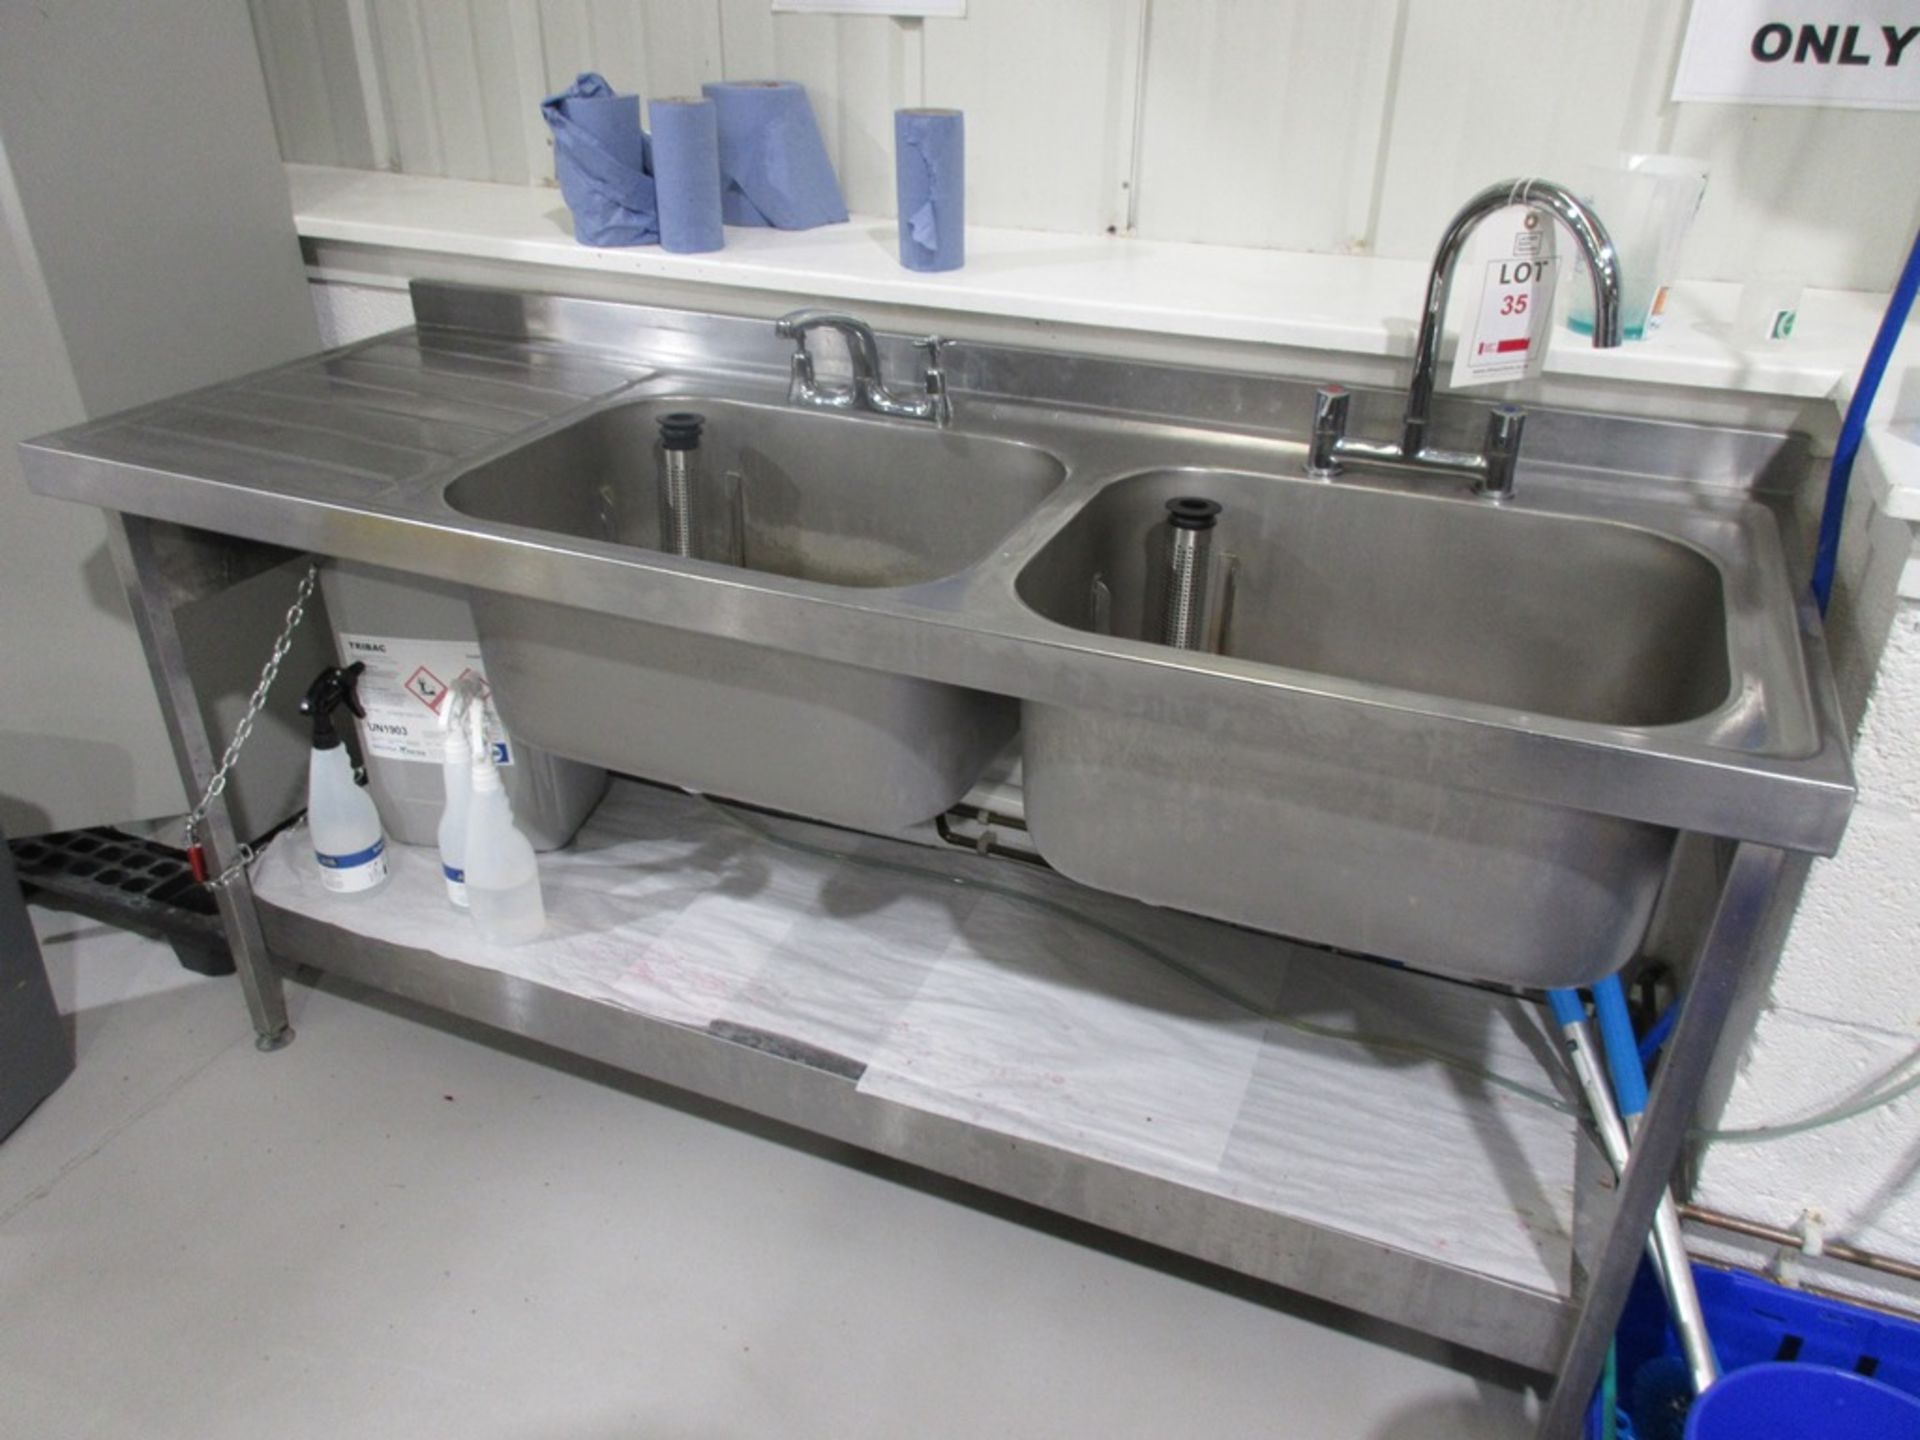 Stainless steel freestanding twin deep bowl sink and drainer with undershelf, 1800mm x 660mm